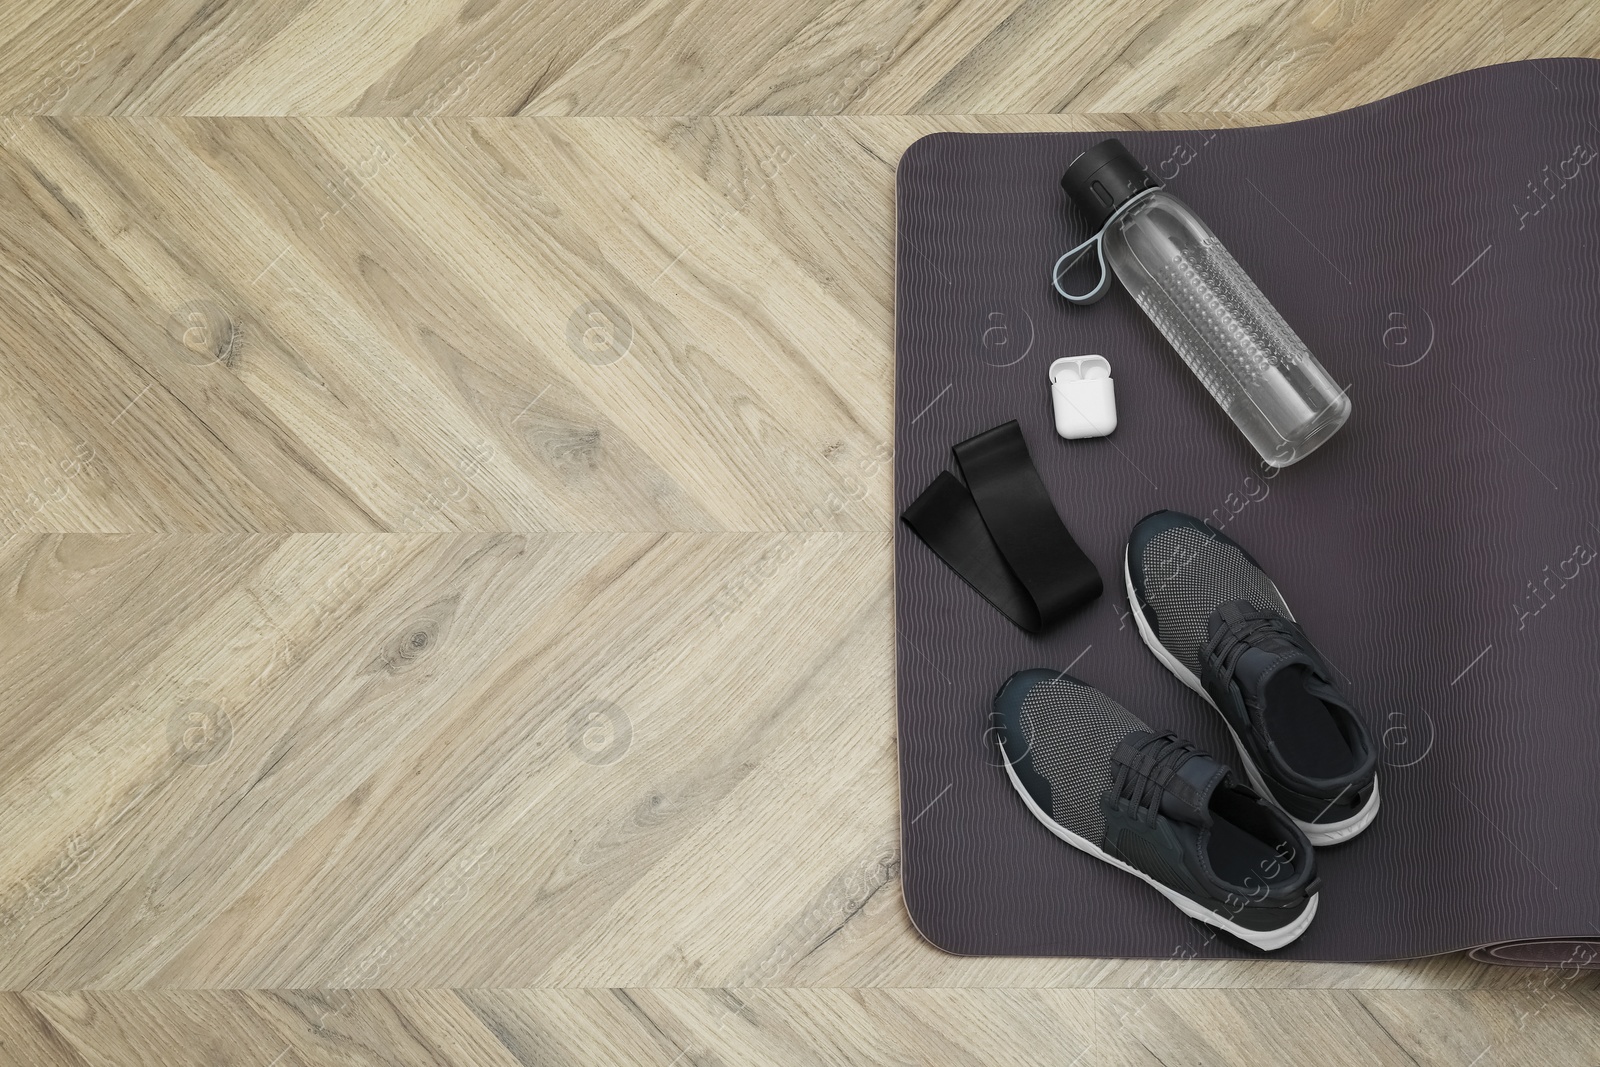 Photo of Exercise mat, bottle of water, wireless earphones, fitness elastic band and shoes on wooden floor, top view. Space for text